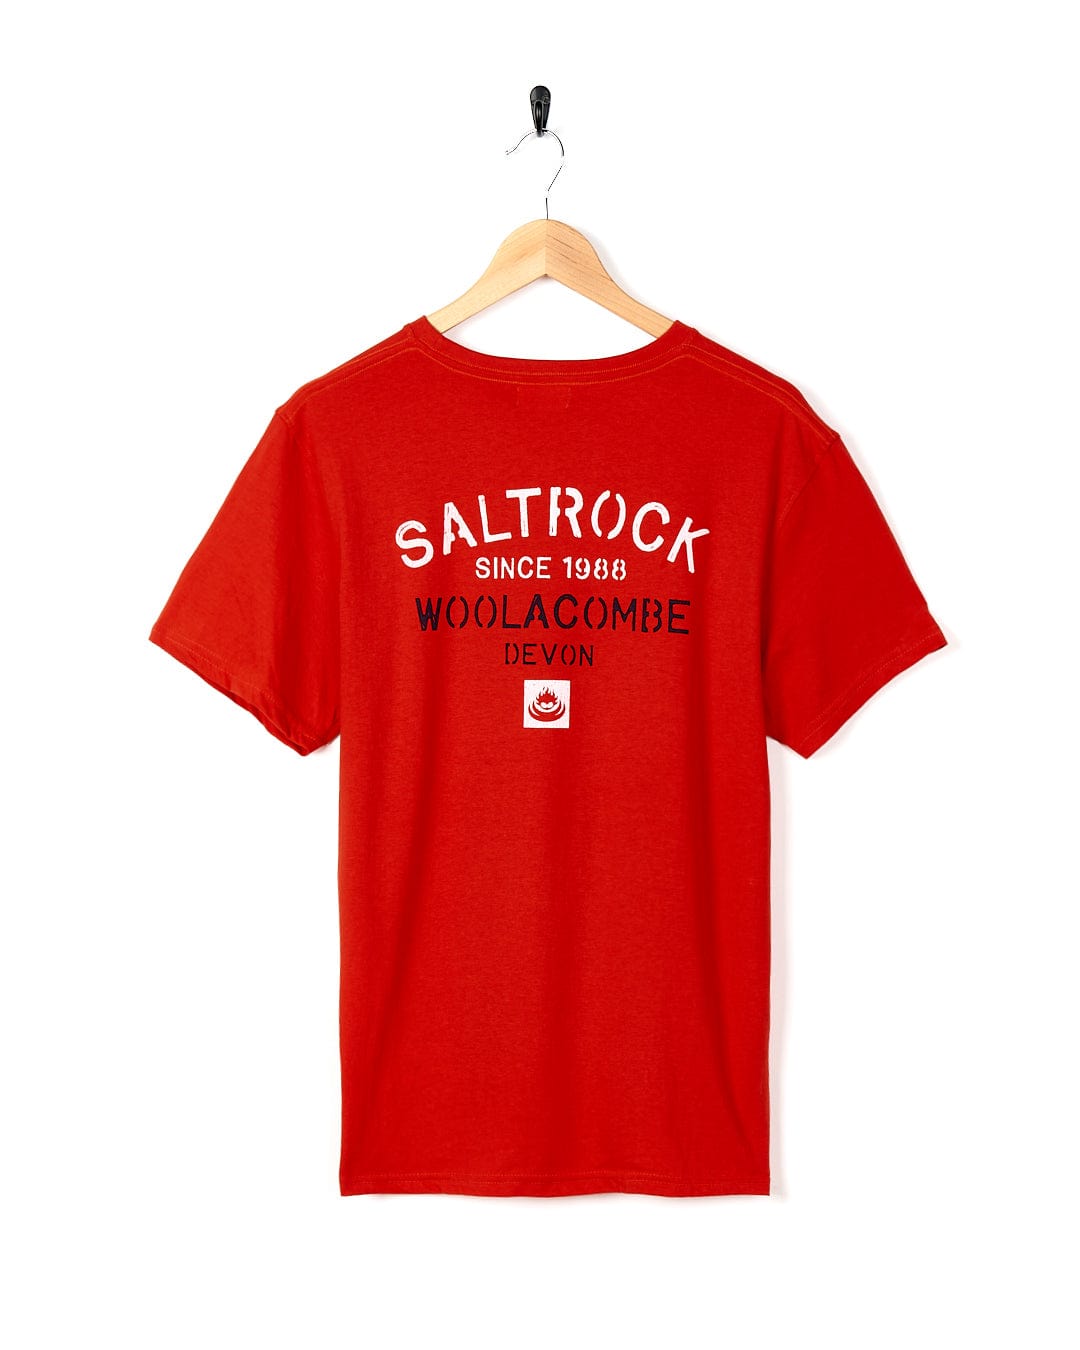 A Stencil - Mens Location T-Shirt - Woolacombe - Red with the brand name Saltrock on it.